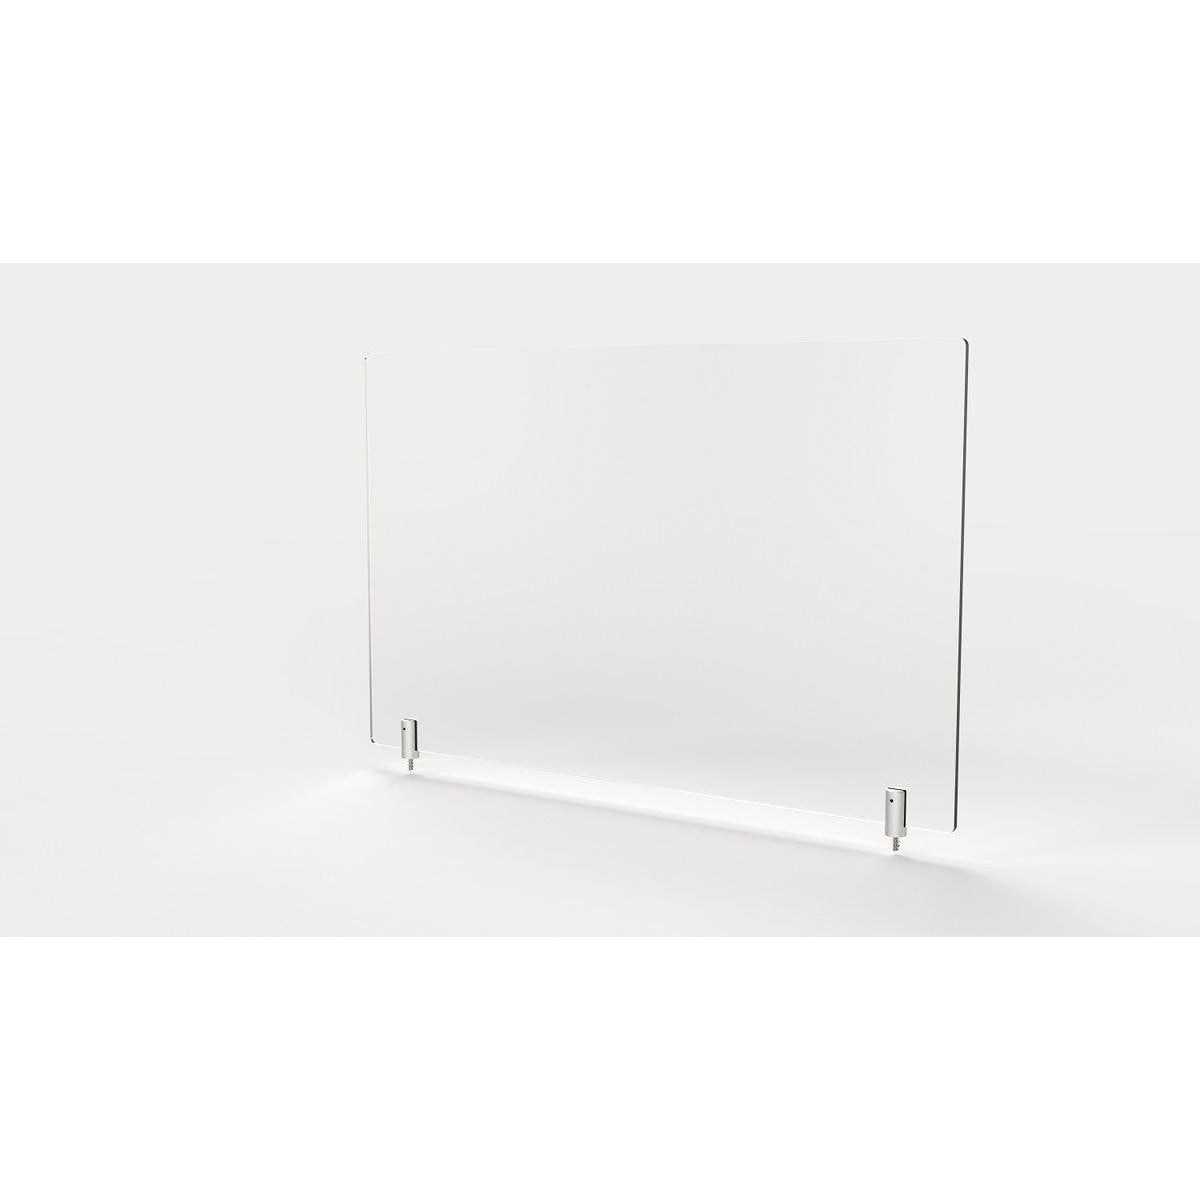 Frosted Thermoplastic Partition & Cubicle Extender with Permanent Screw Attachment, 18"H x 36"W